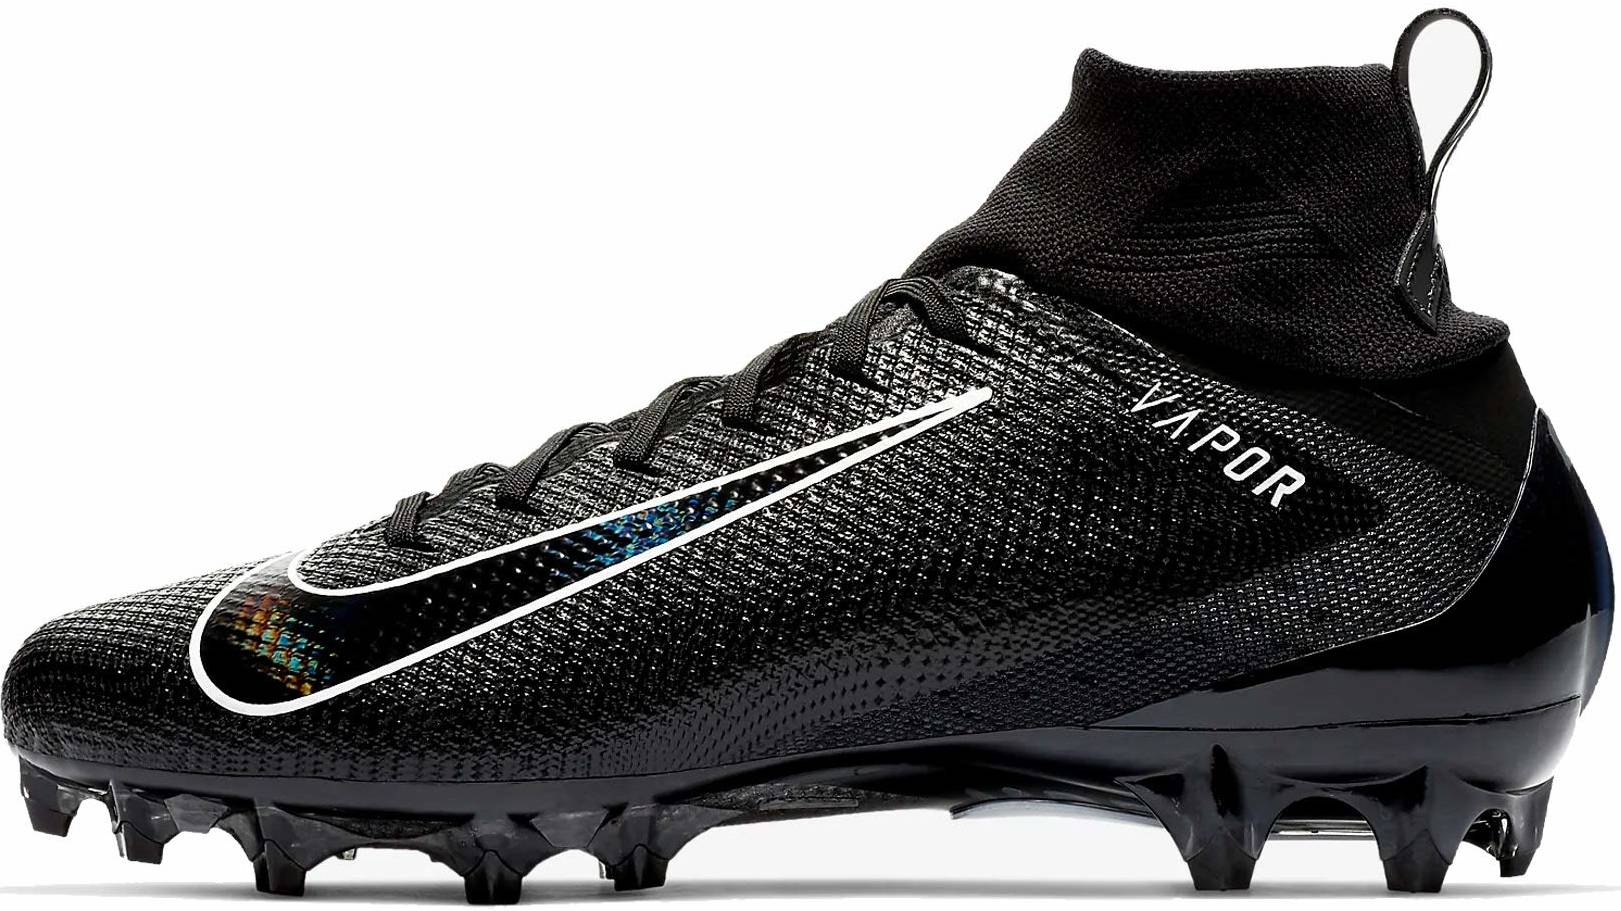 Save 59% on Football Cleats (41 Models 